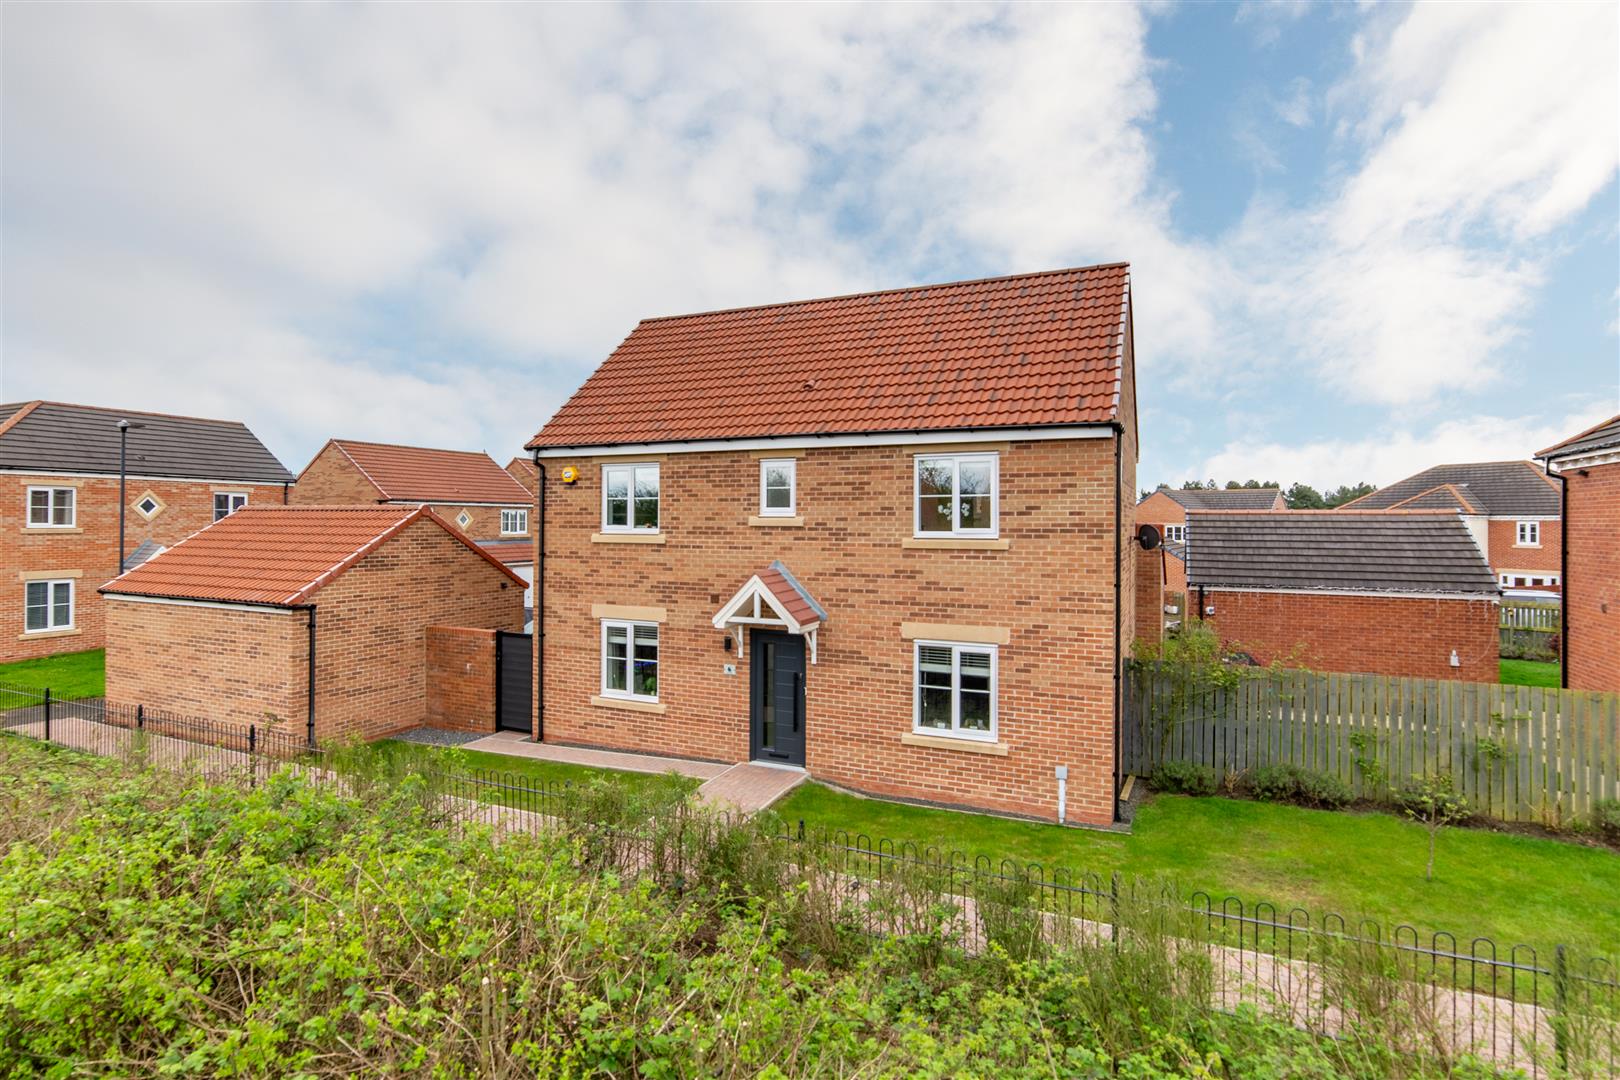 4 bed detached house for sale in Linnet Close, Wideopen - Property Image 1